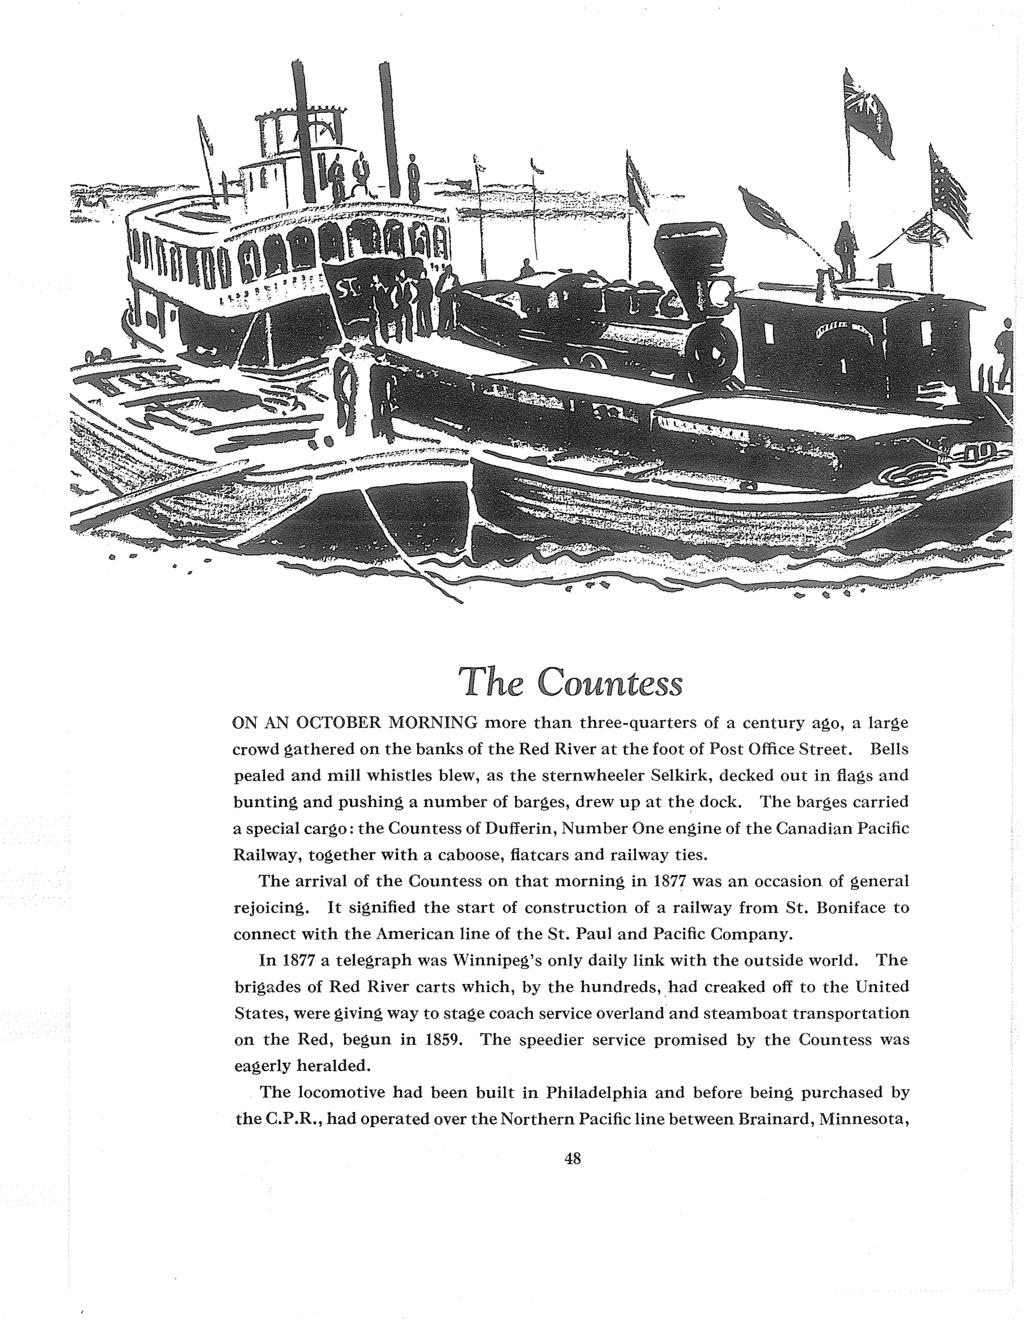 The Countess ON AN OCTOBER MORNING more than three-quarters of a century ago, a large crowd gathered on the banks of the Red River at the foot of Post Office Street.